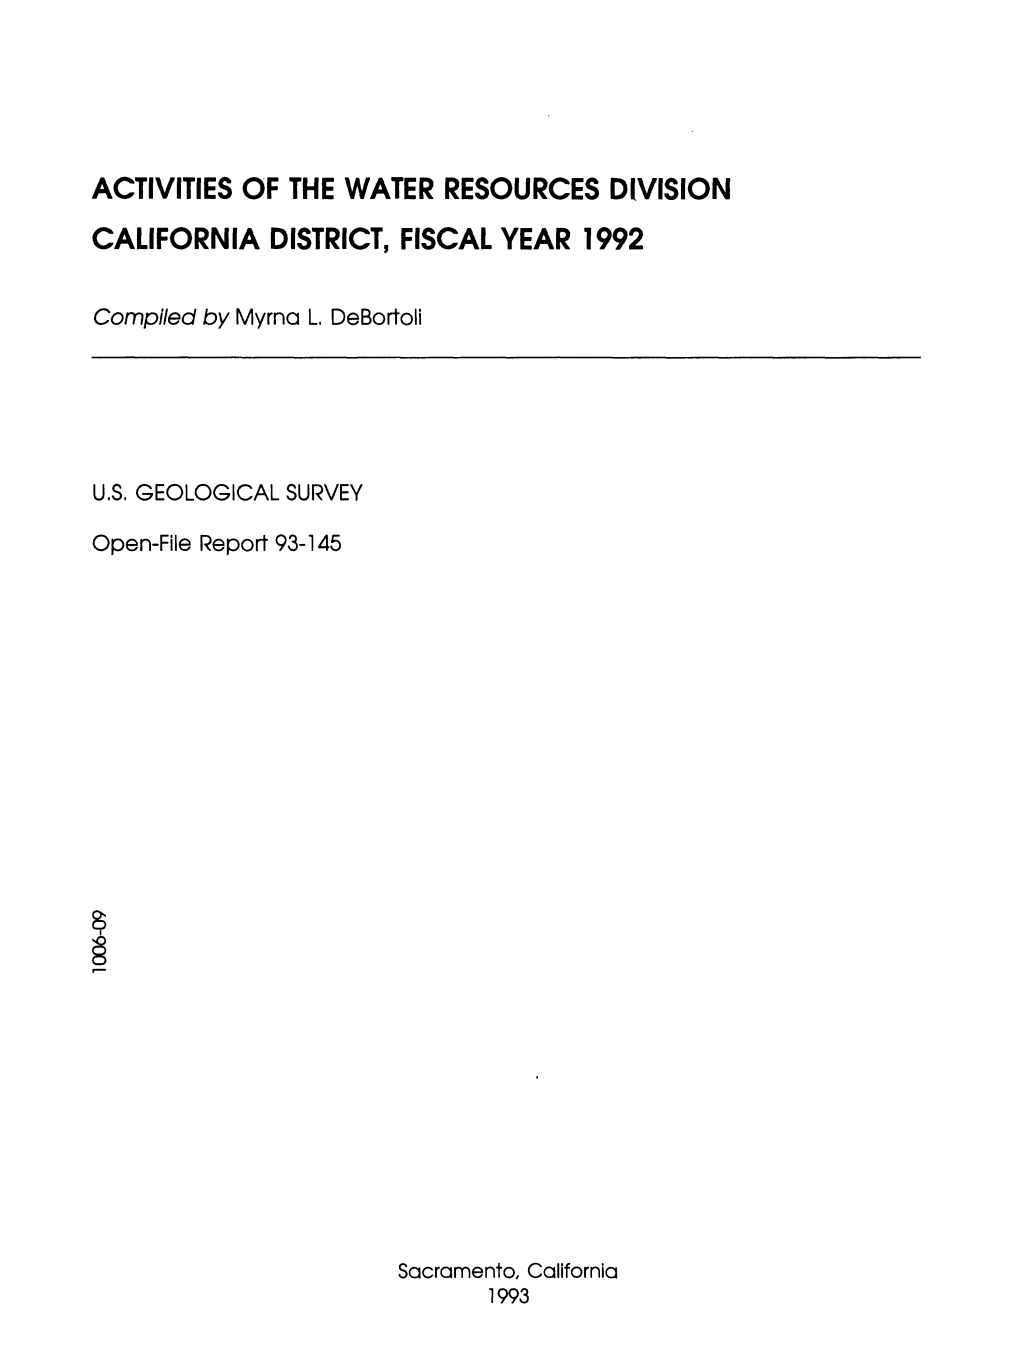 Activities of the Water Resources Division California District, Fiscal Year 1992